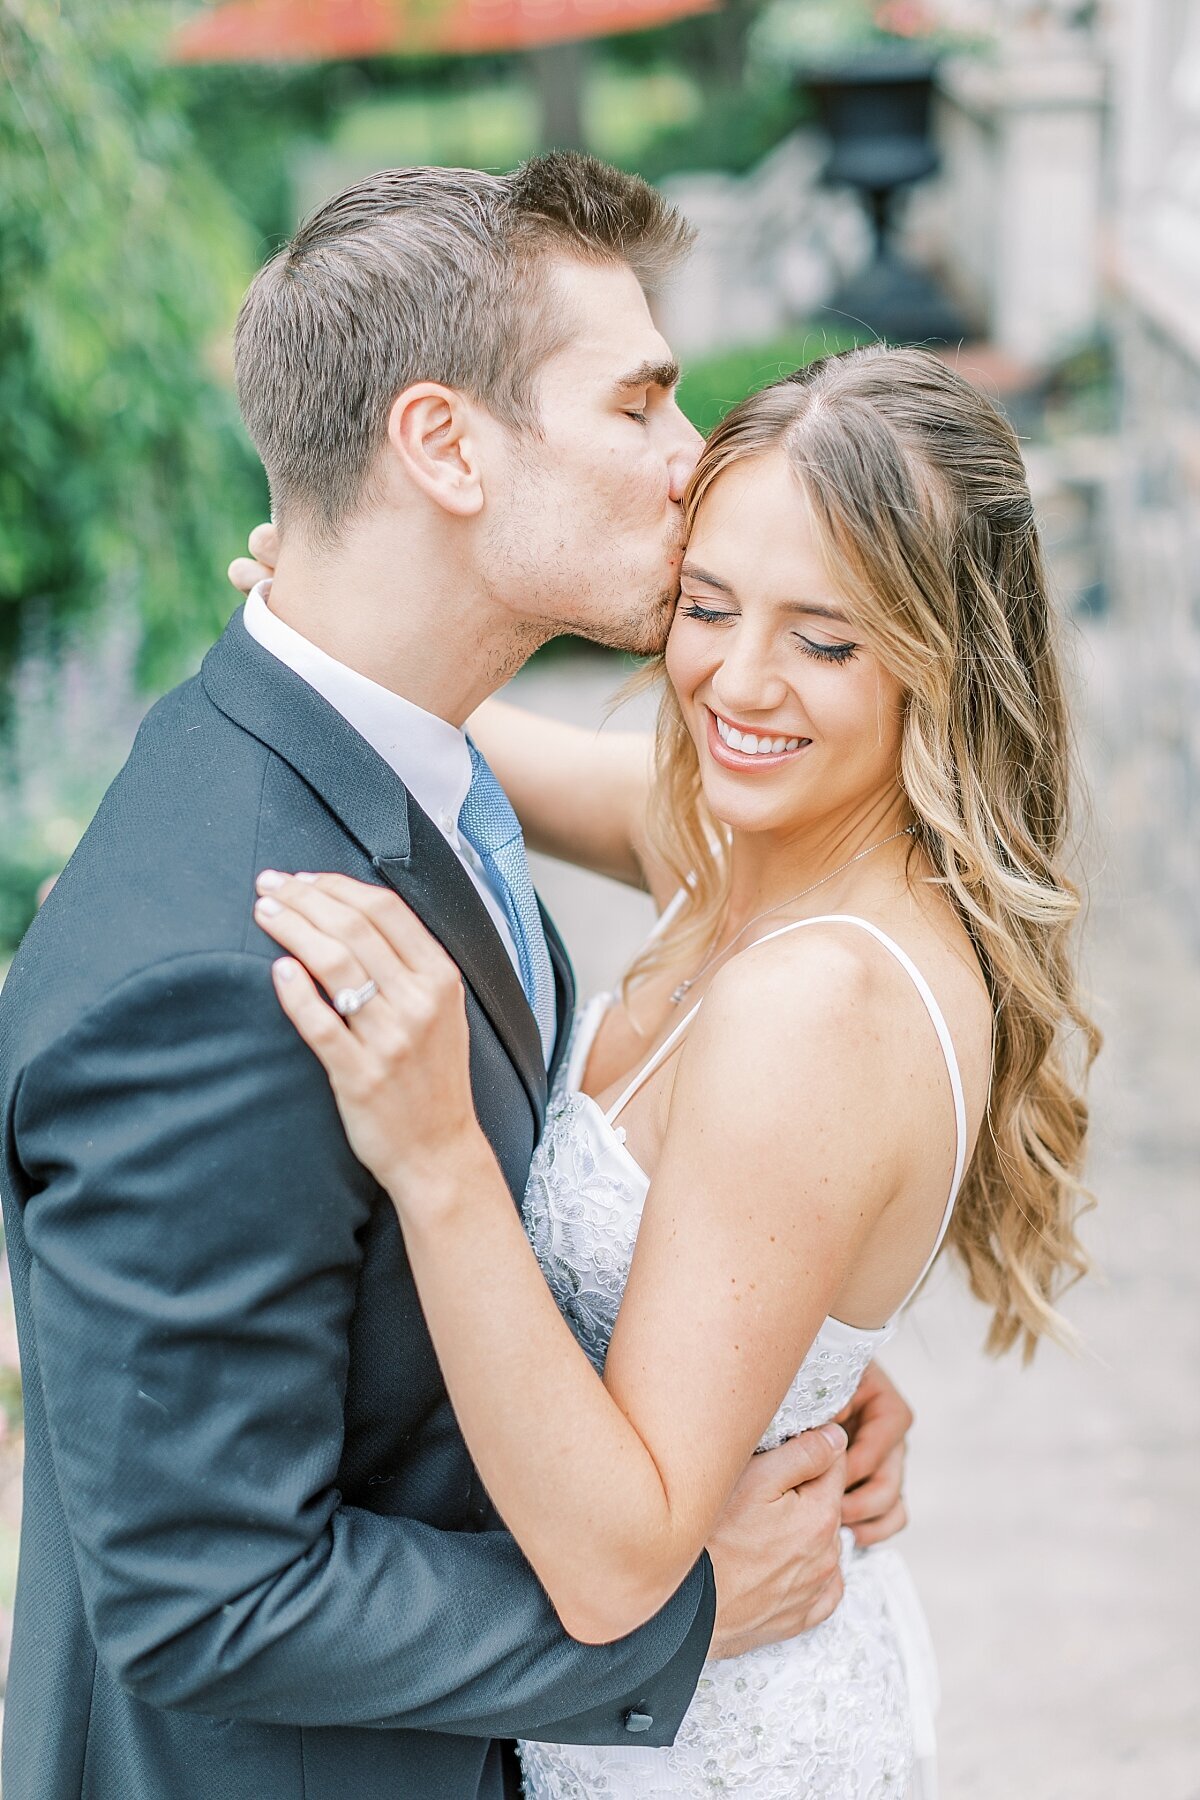 rebecca shivers photography bright and airy wedding photographer fine art moonstone manor wedding